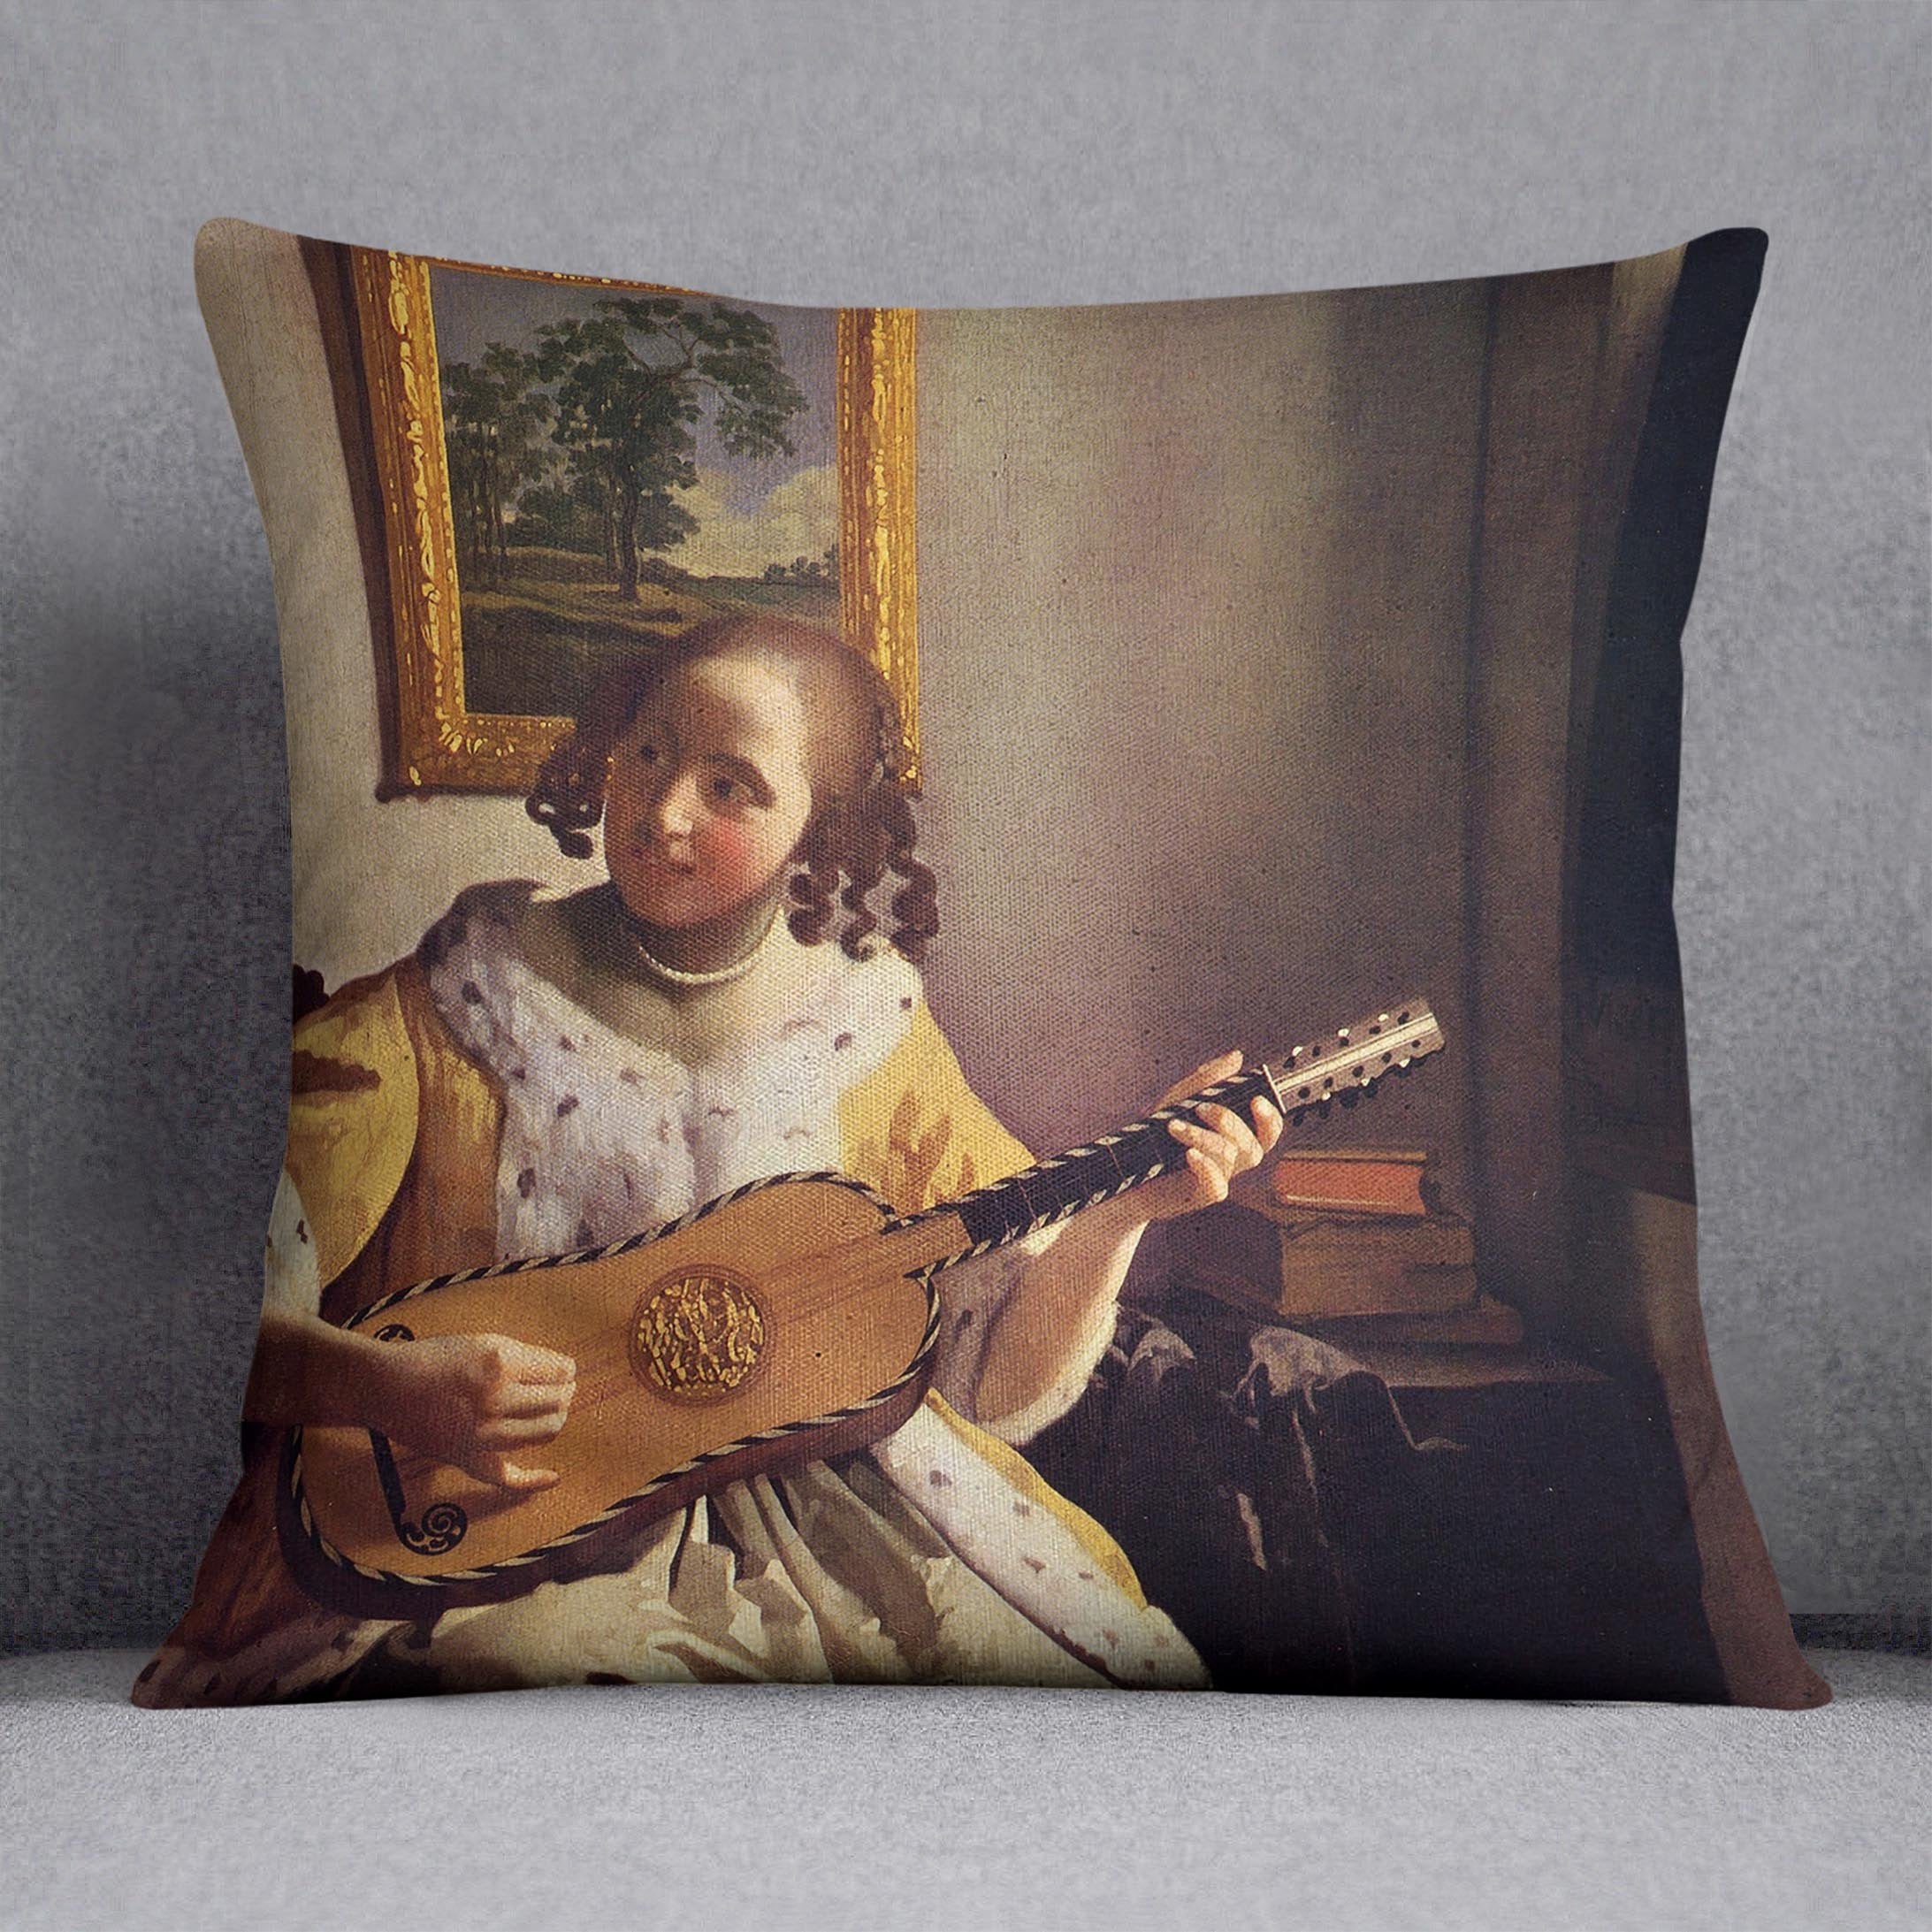 The guitar player by Vermeer Cushion